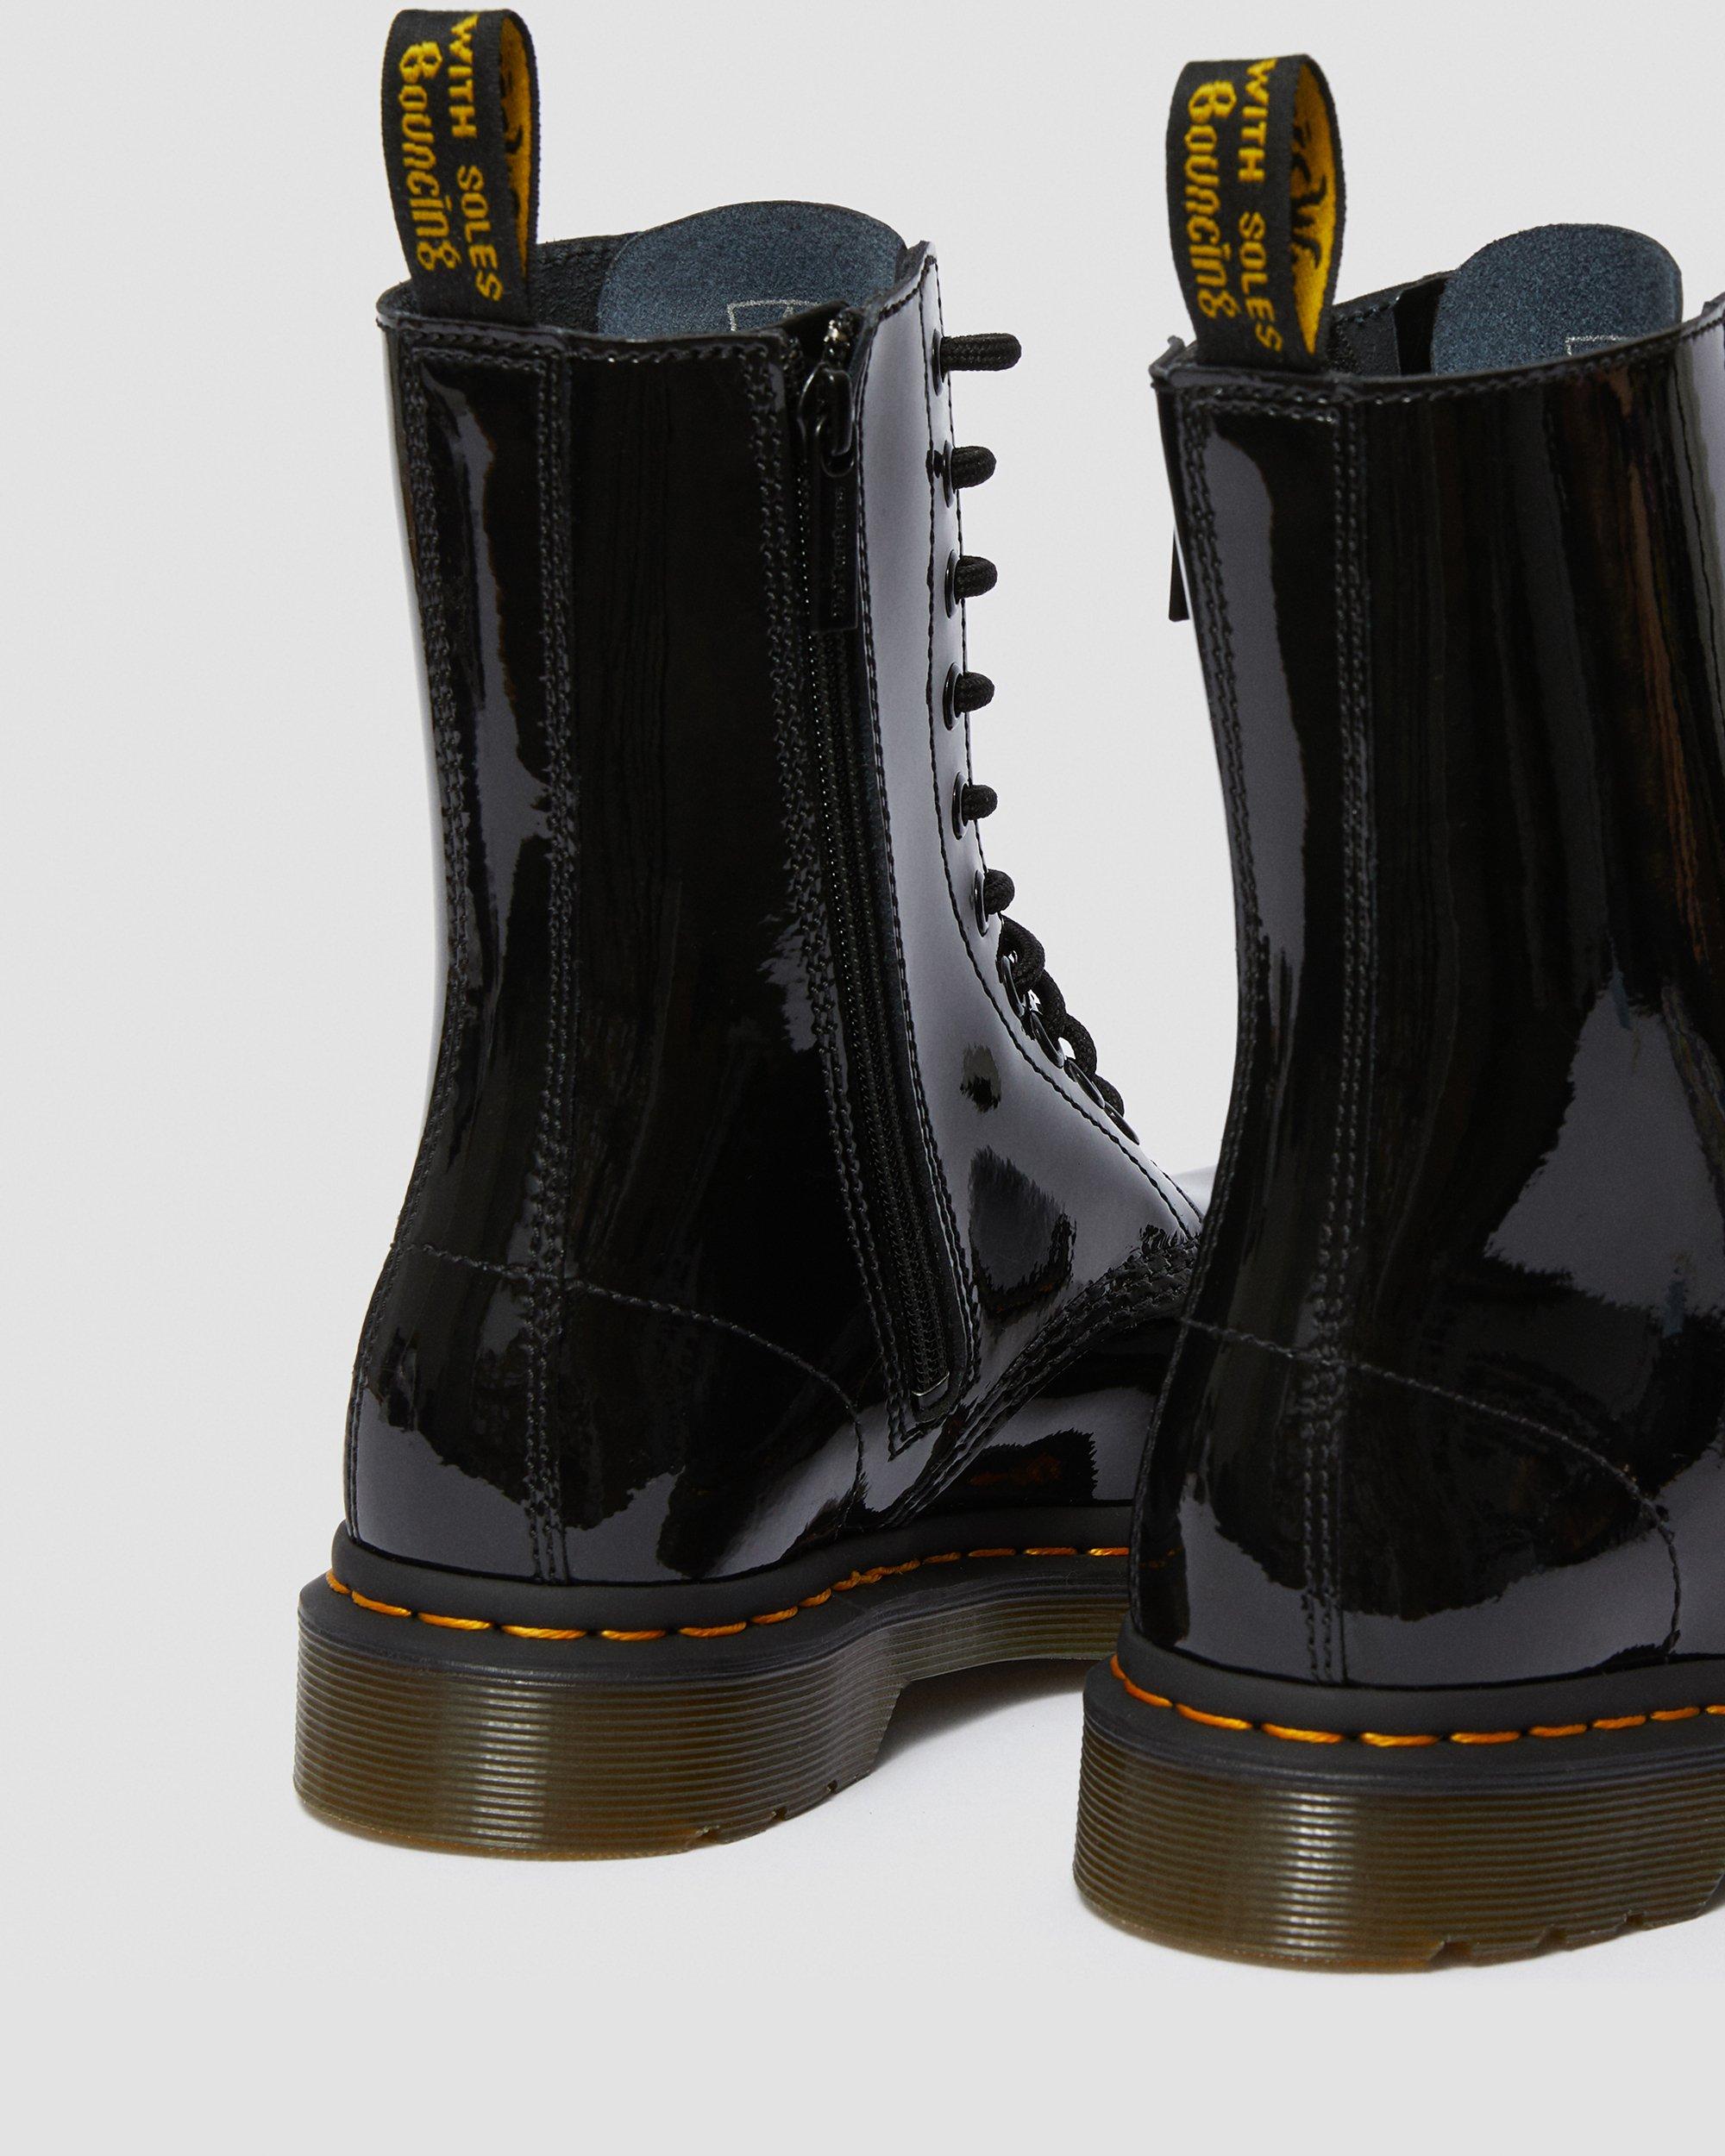 DR MARTENS 1490 Women's Patent Leather Mid Calf Boots